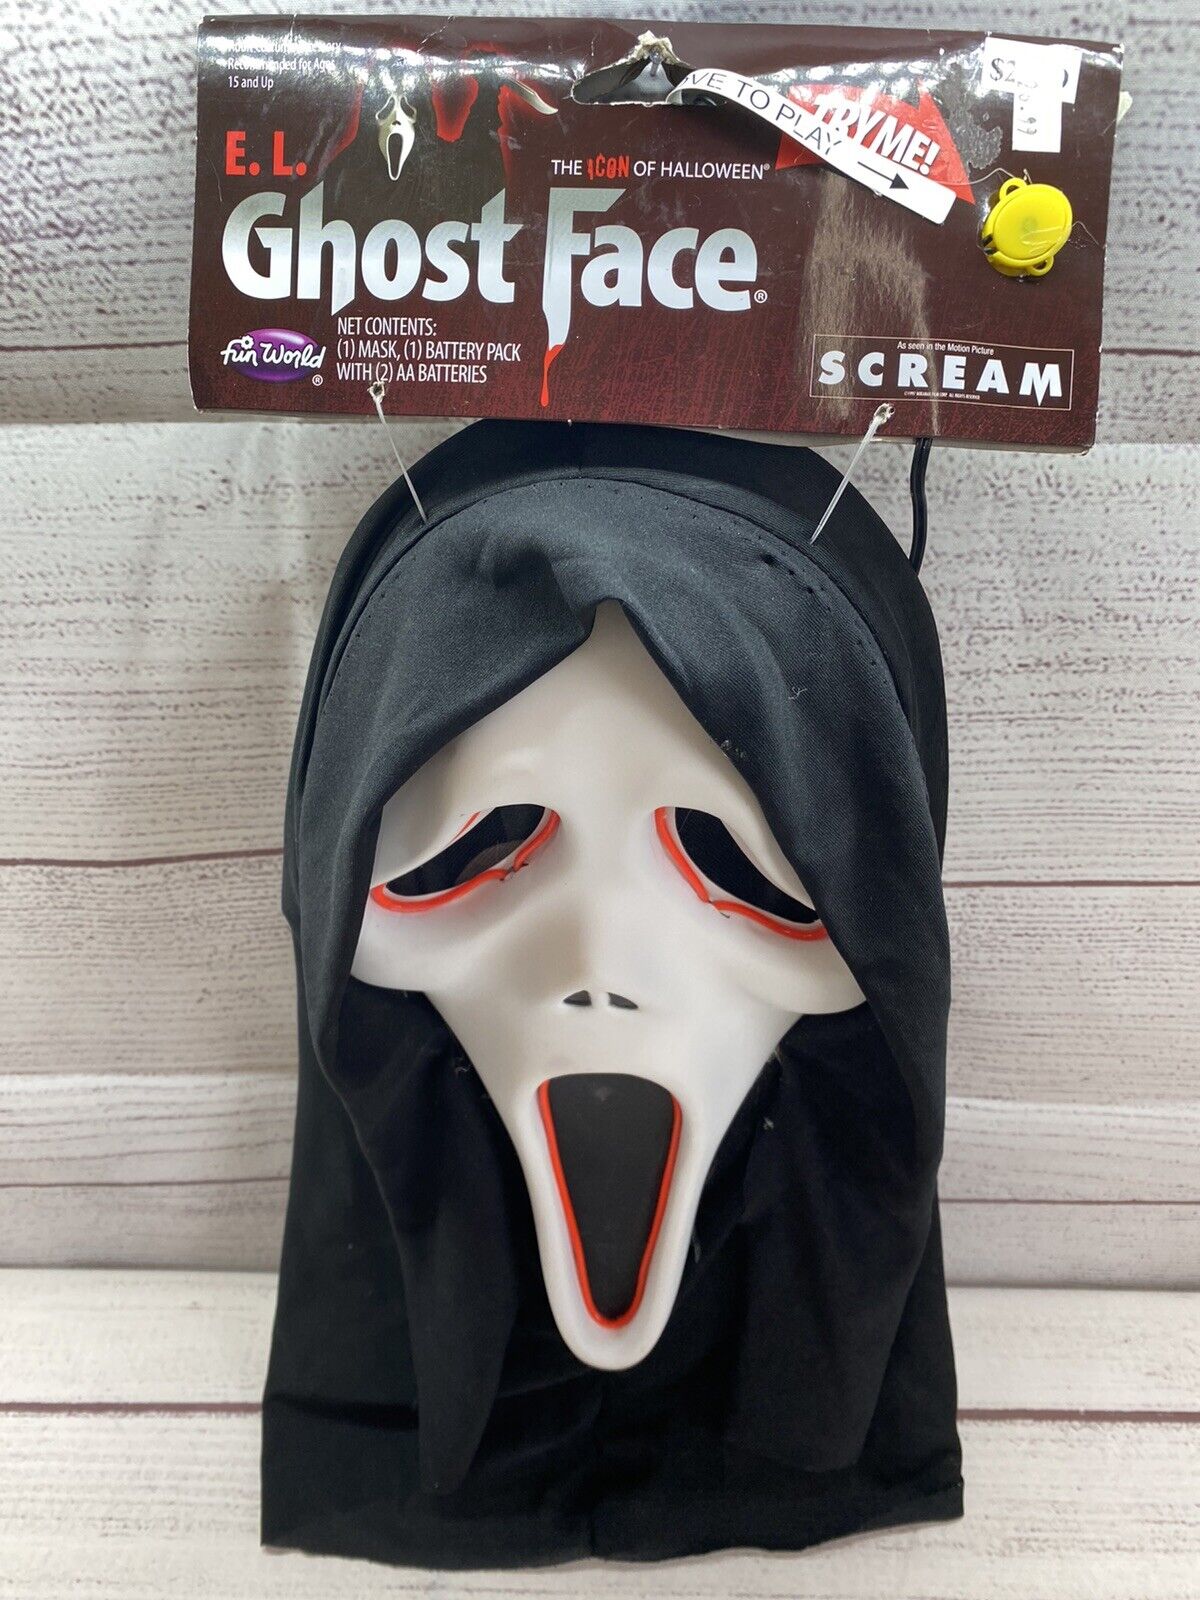 E.L. Ghost Face Halloween Mask - From The Movie Scream Lights Up - VINTAGE